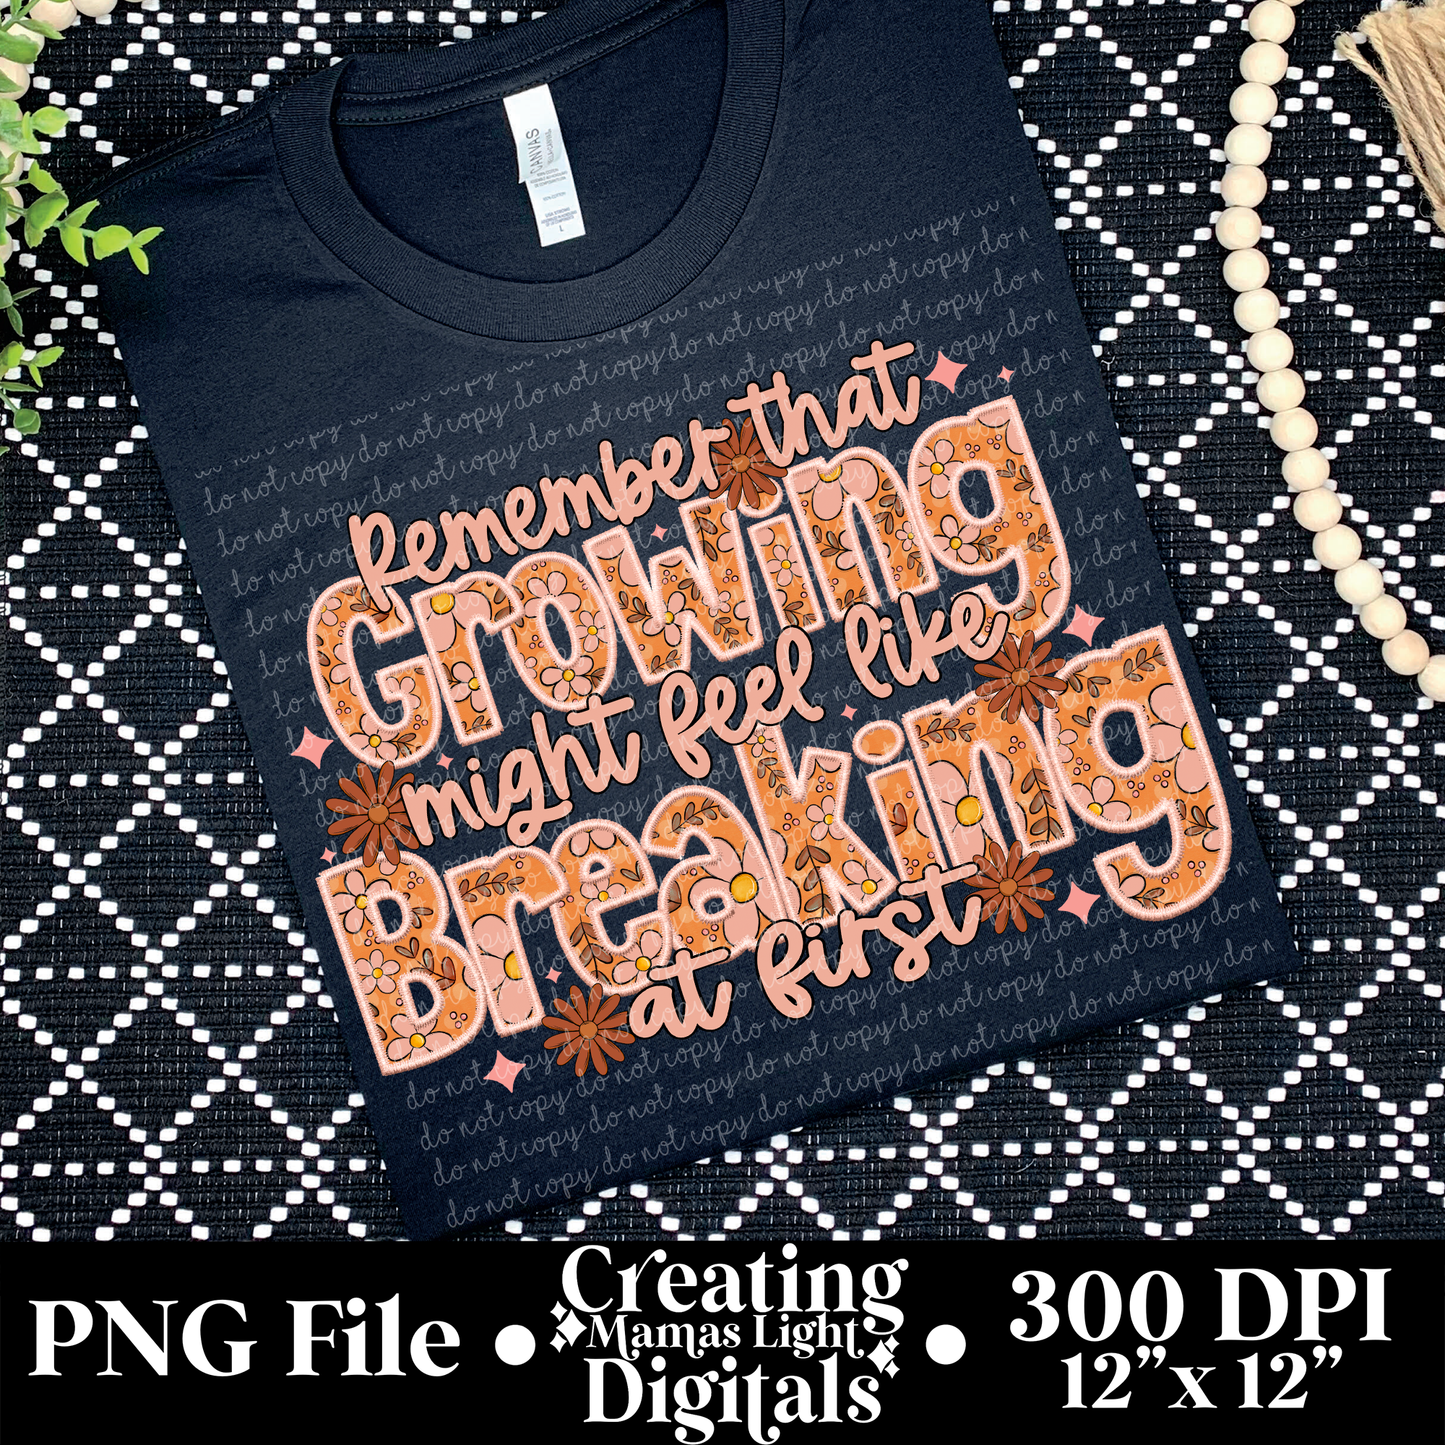 Growing might feel like breaking at first *FAUX EMBROIDERY*